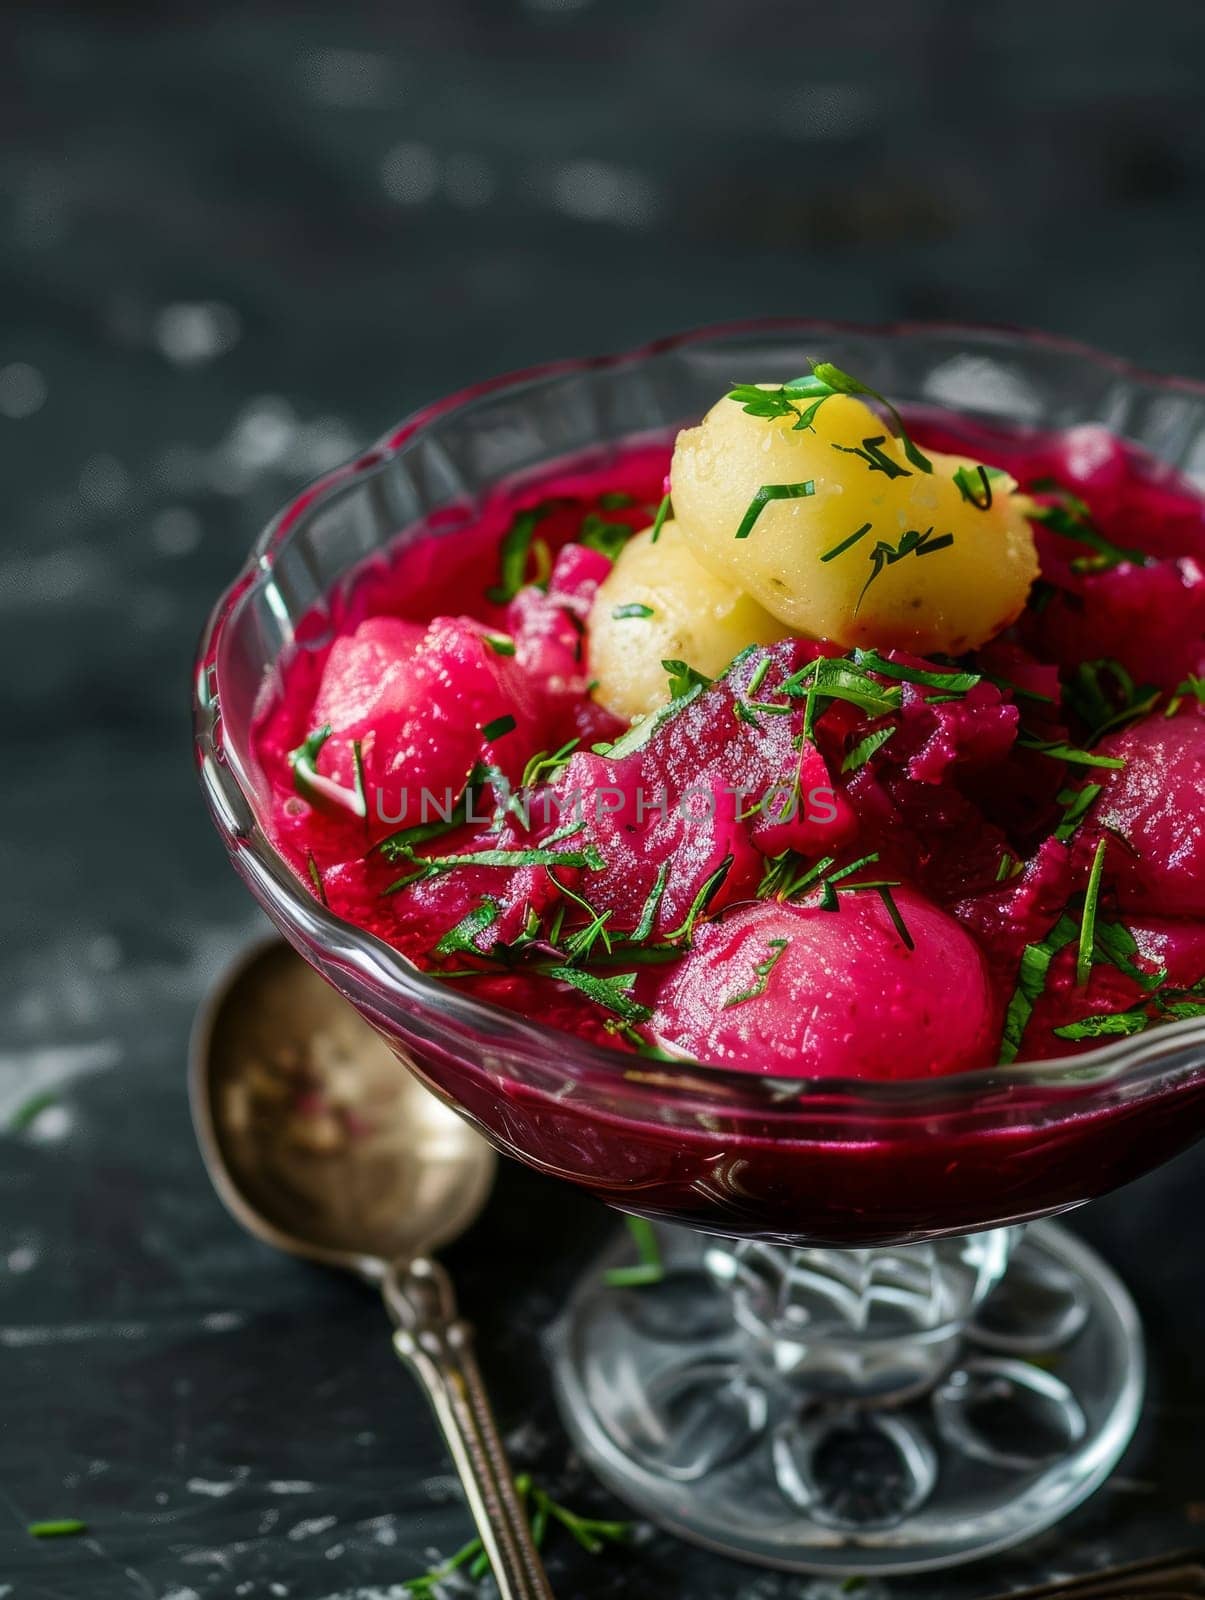 Lithuanian saltibarsciai borscht, a cold beet soup, served in a glass bowl with boiled potatoes. A refreshing and traditional summer dish from Lithuania